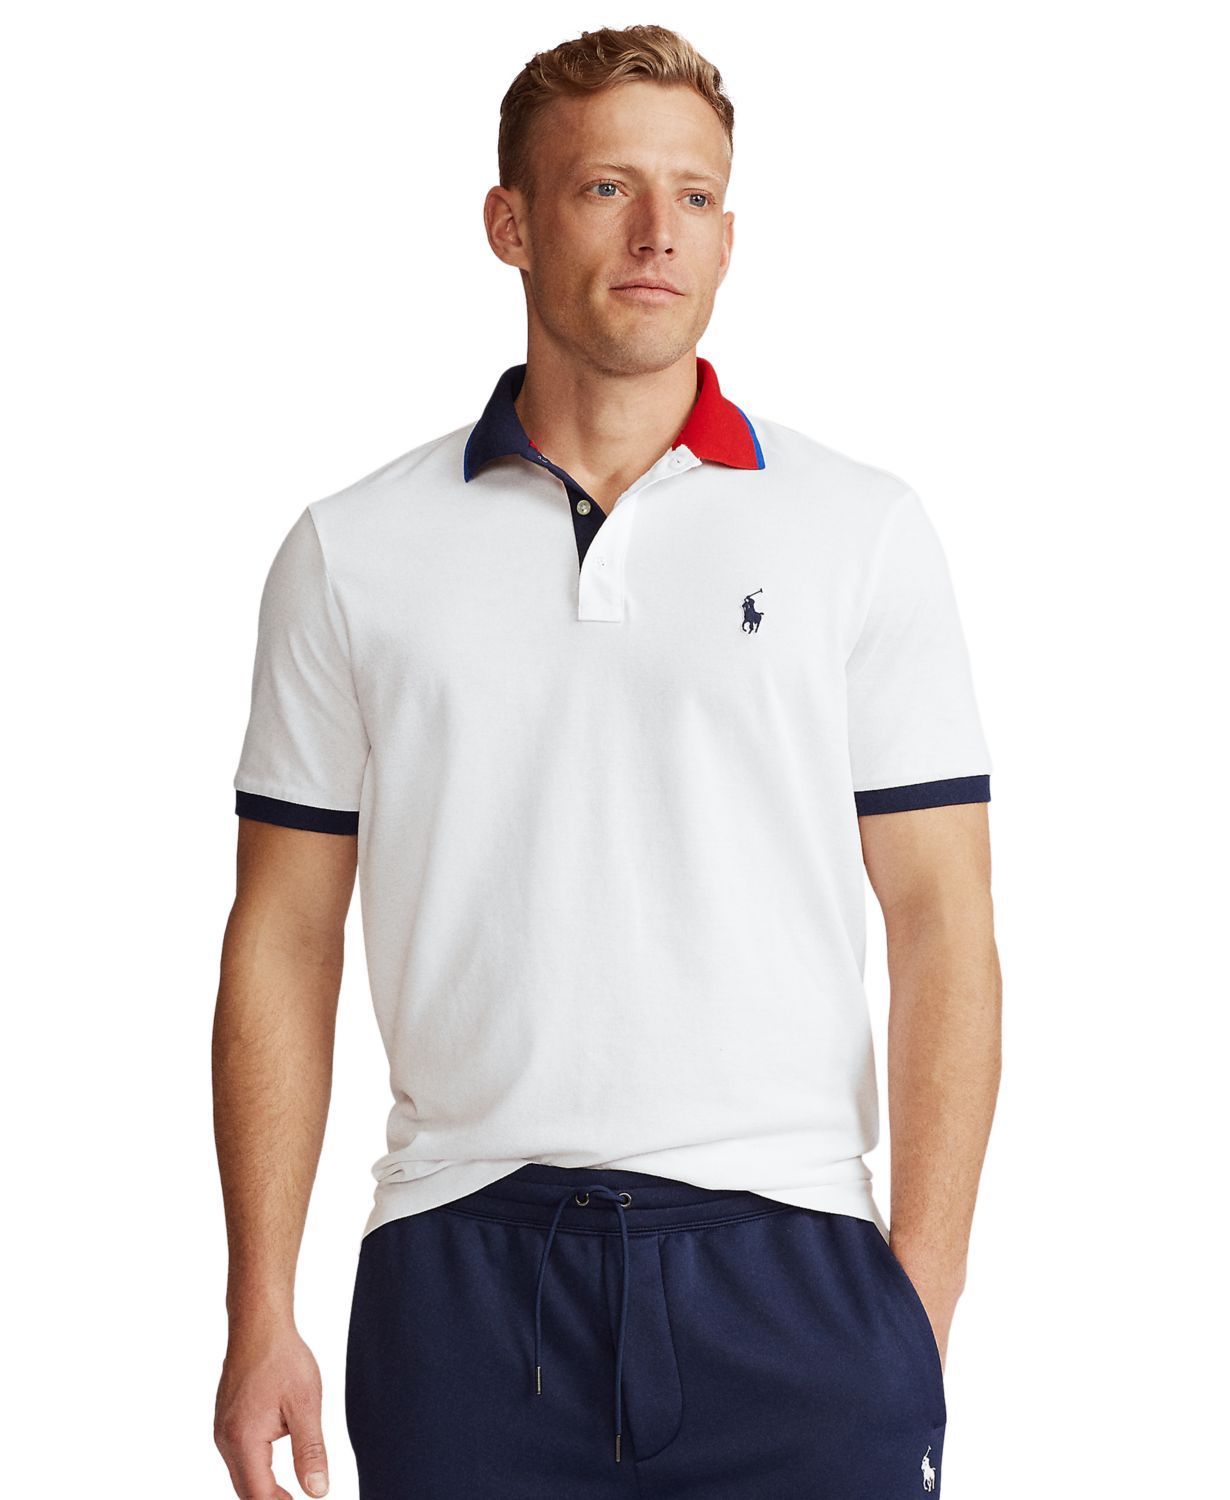 These Polo by Ralph Lauren shirts are under $30 this weekend at Macys